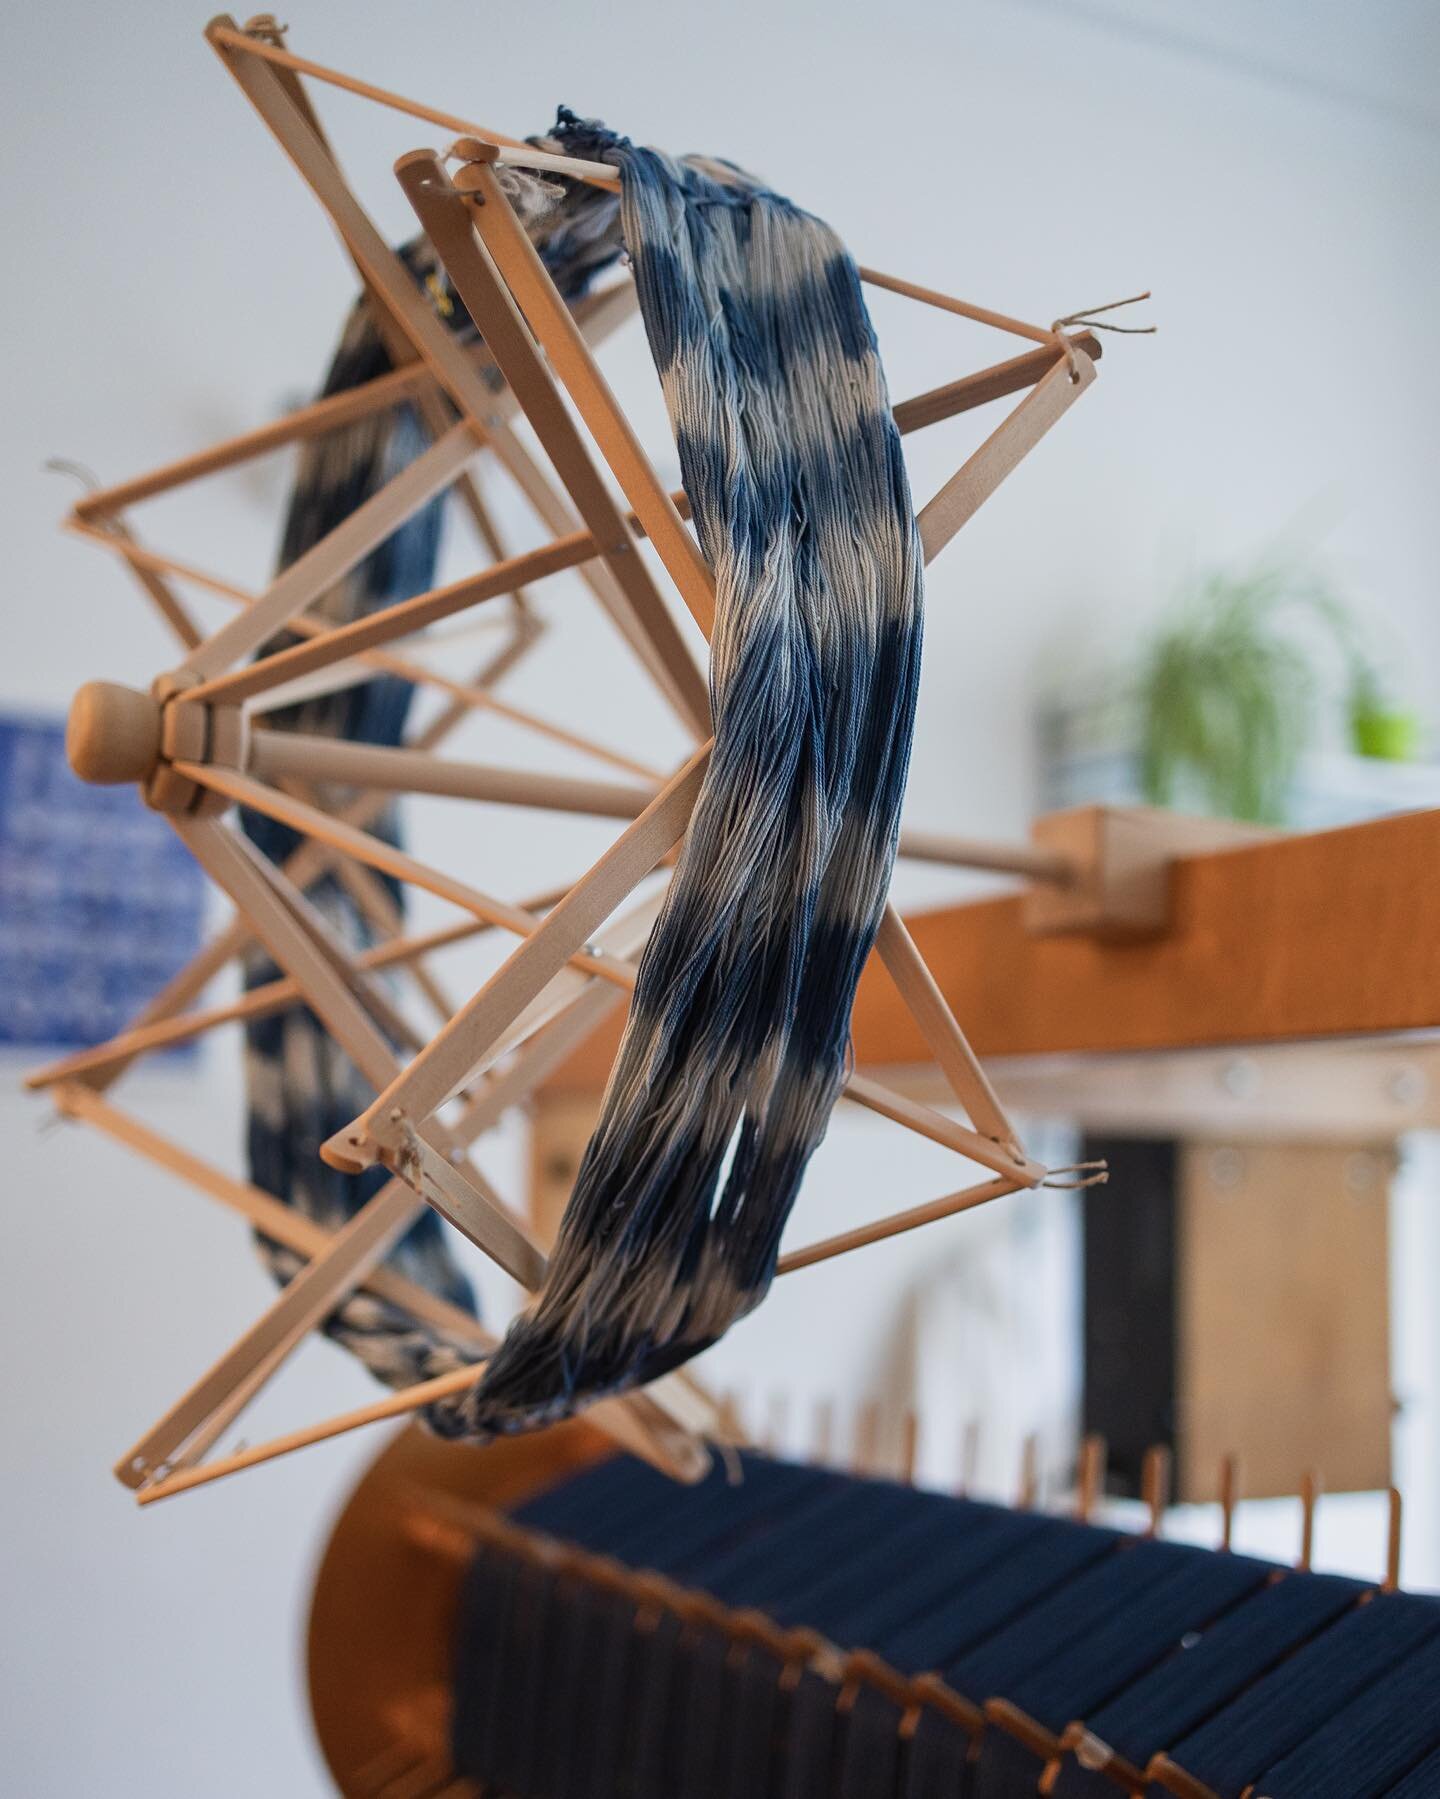 Untangling yarn &bull; Using my old yarn swift, which is basically like a wooden umbrella, to unwind my hand dyed yarns. Normally I am always looking for yarns on cones, but hand dyeing is making me go back to hanks. An extra step but I am liking the